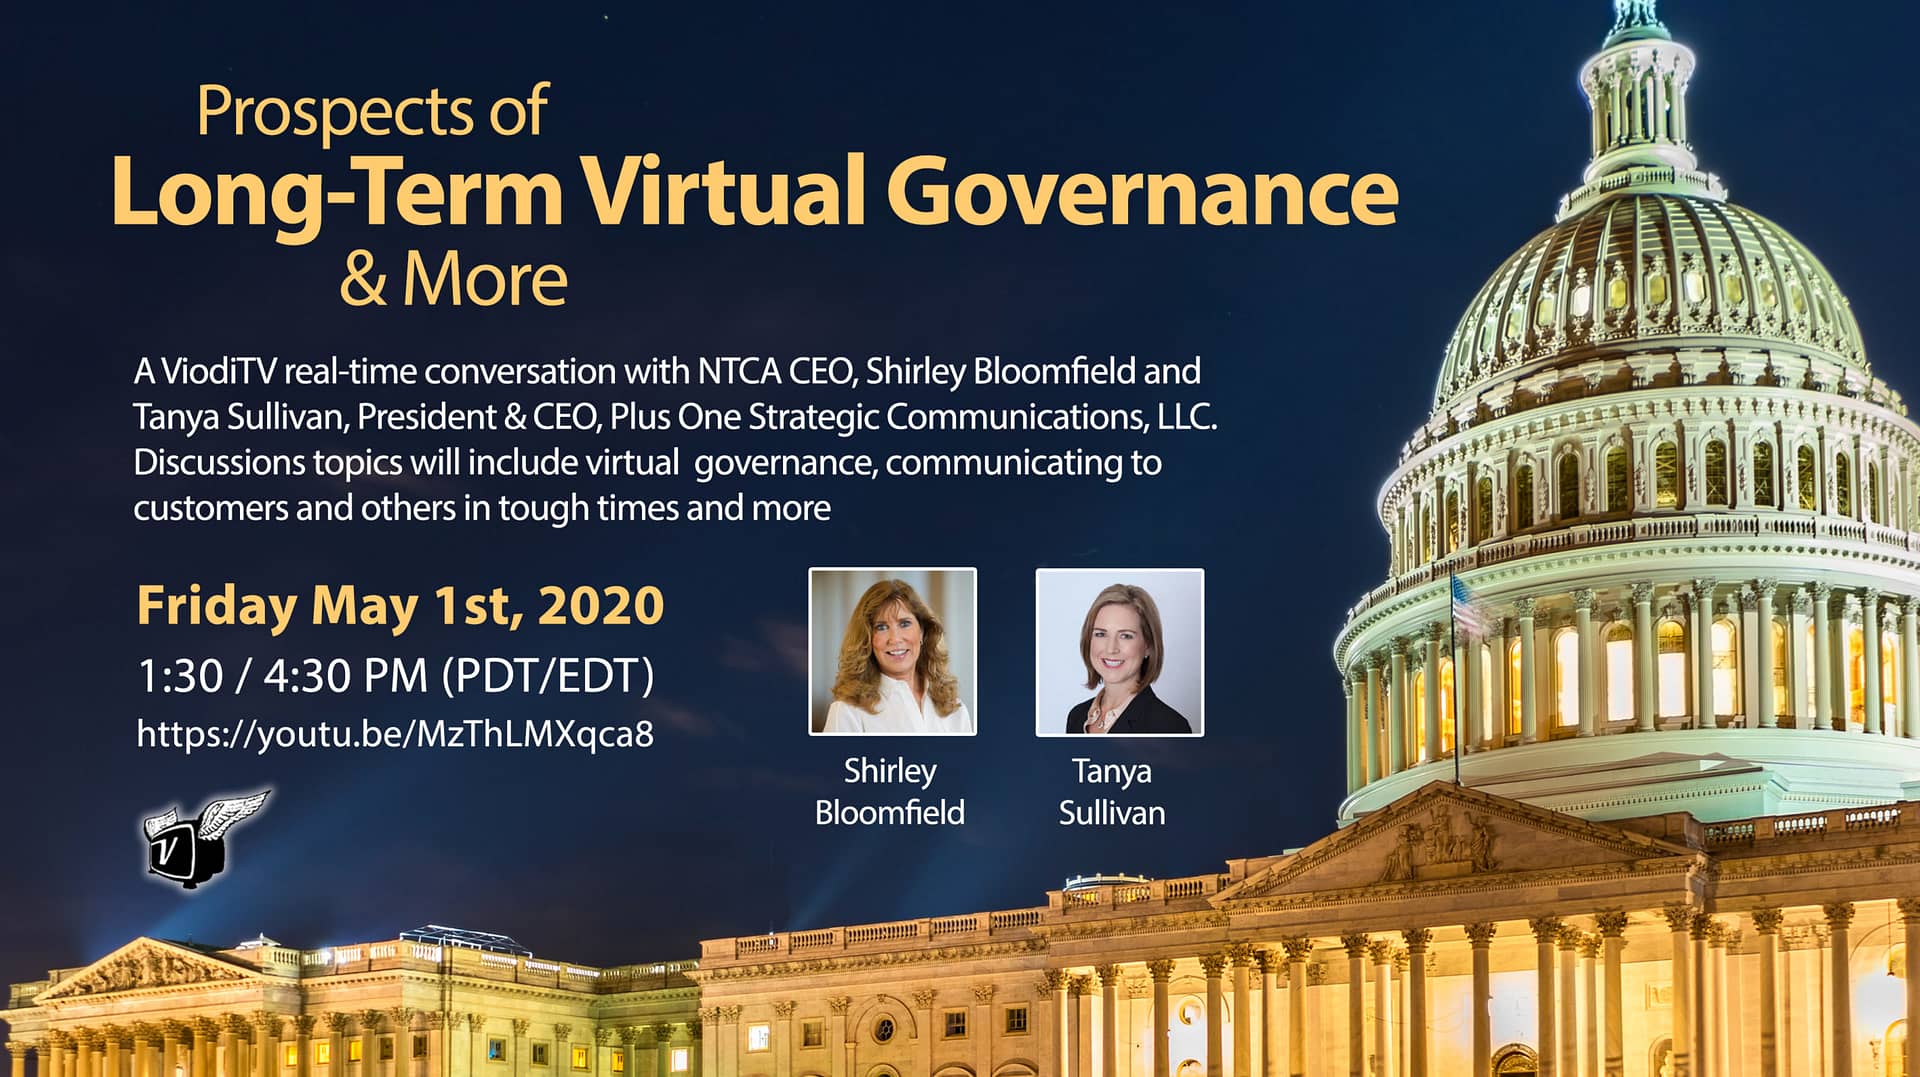 Prospects of Long-Term Virtual Governance & More – A ViodiTV Real-Time Conversation